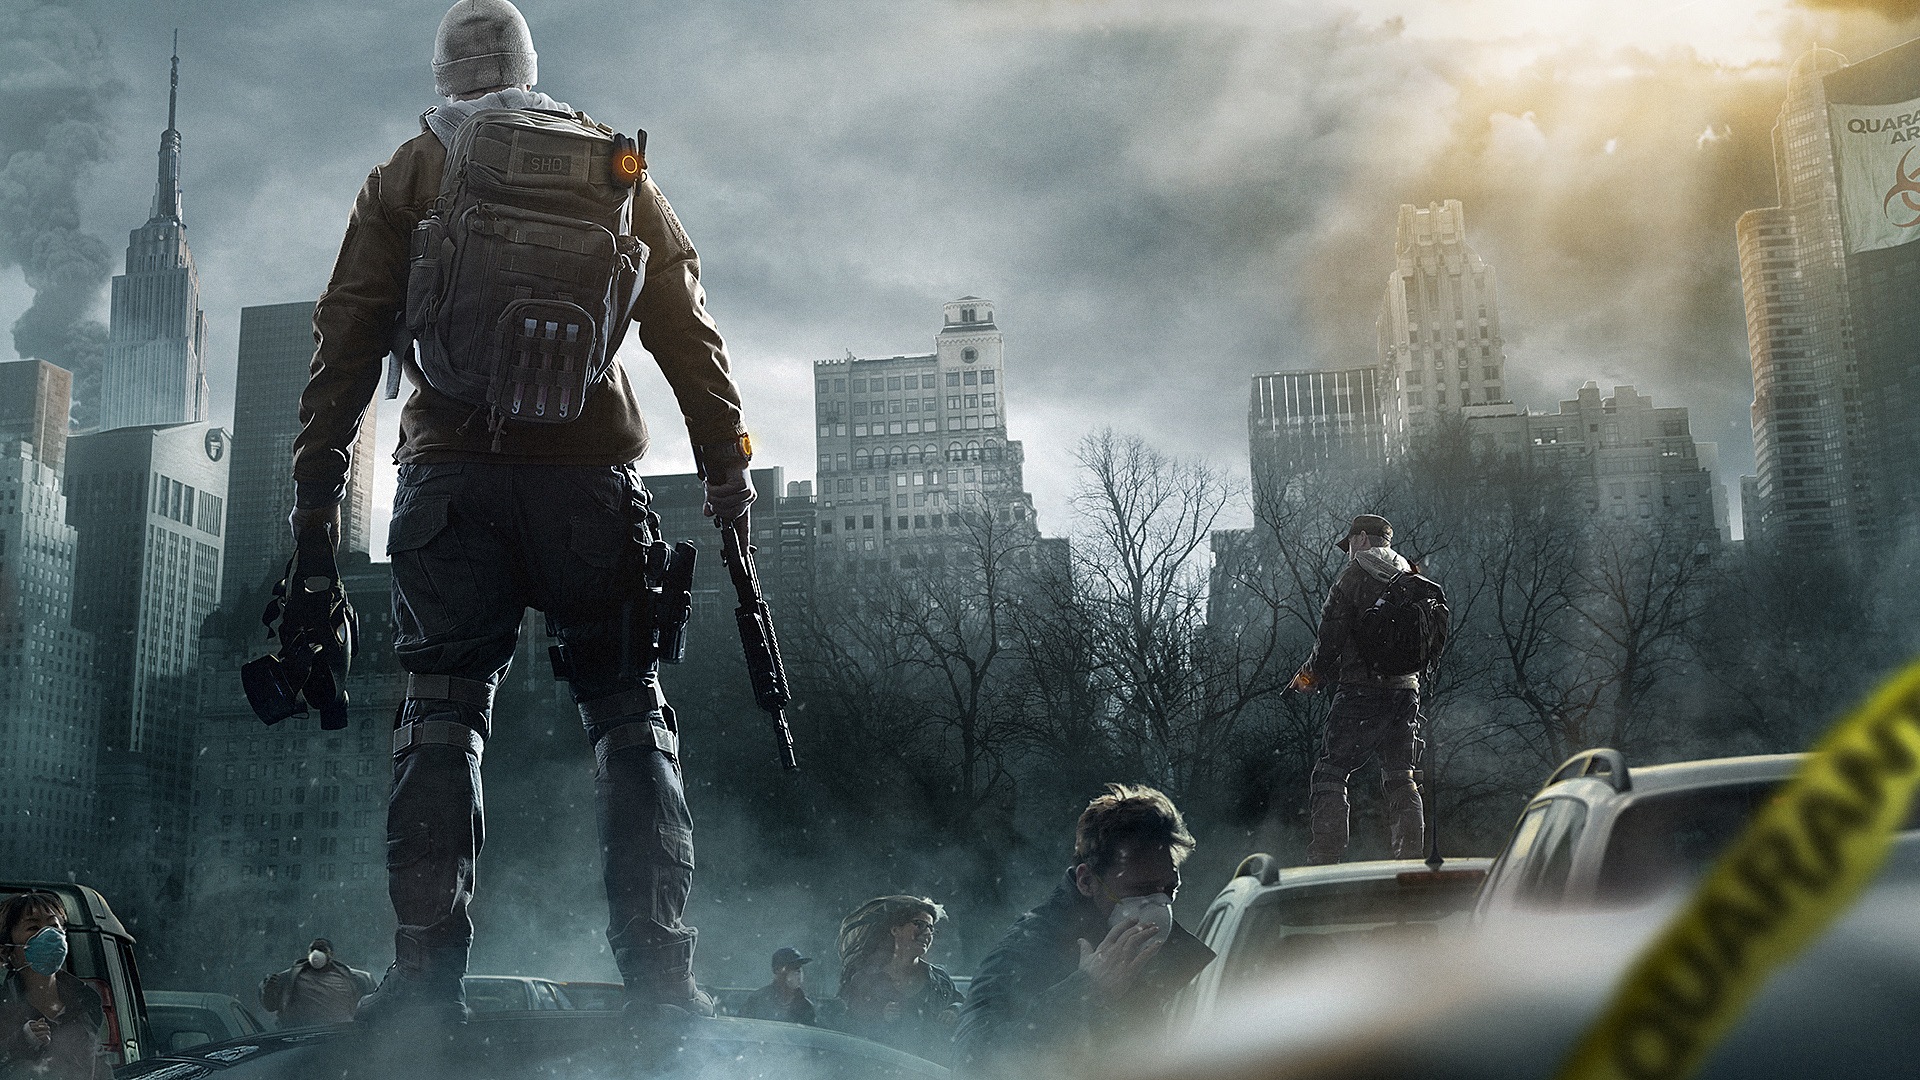 Tom Clancy's The Division, PC game HD wallpapers #1 - 1920x1080